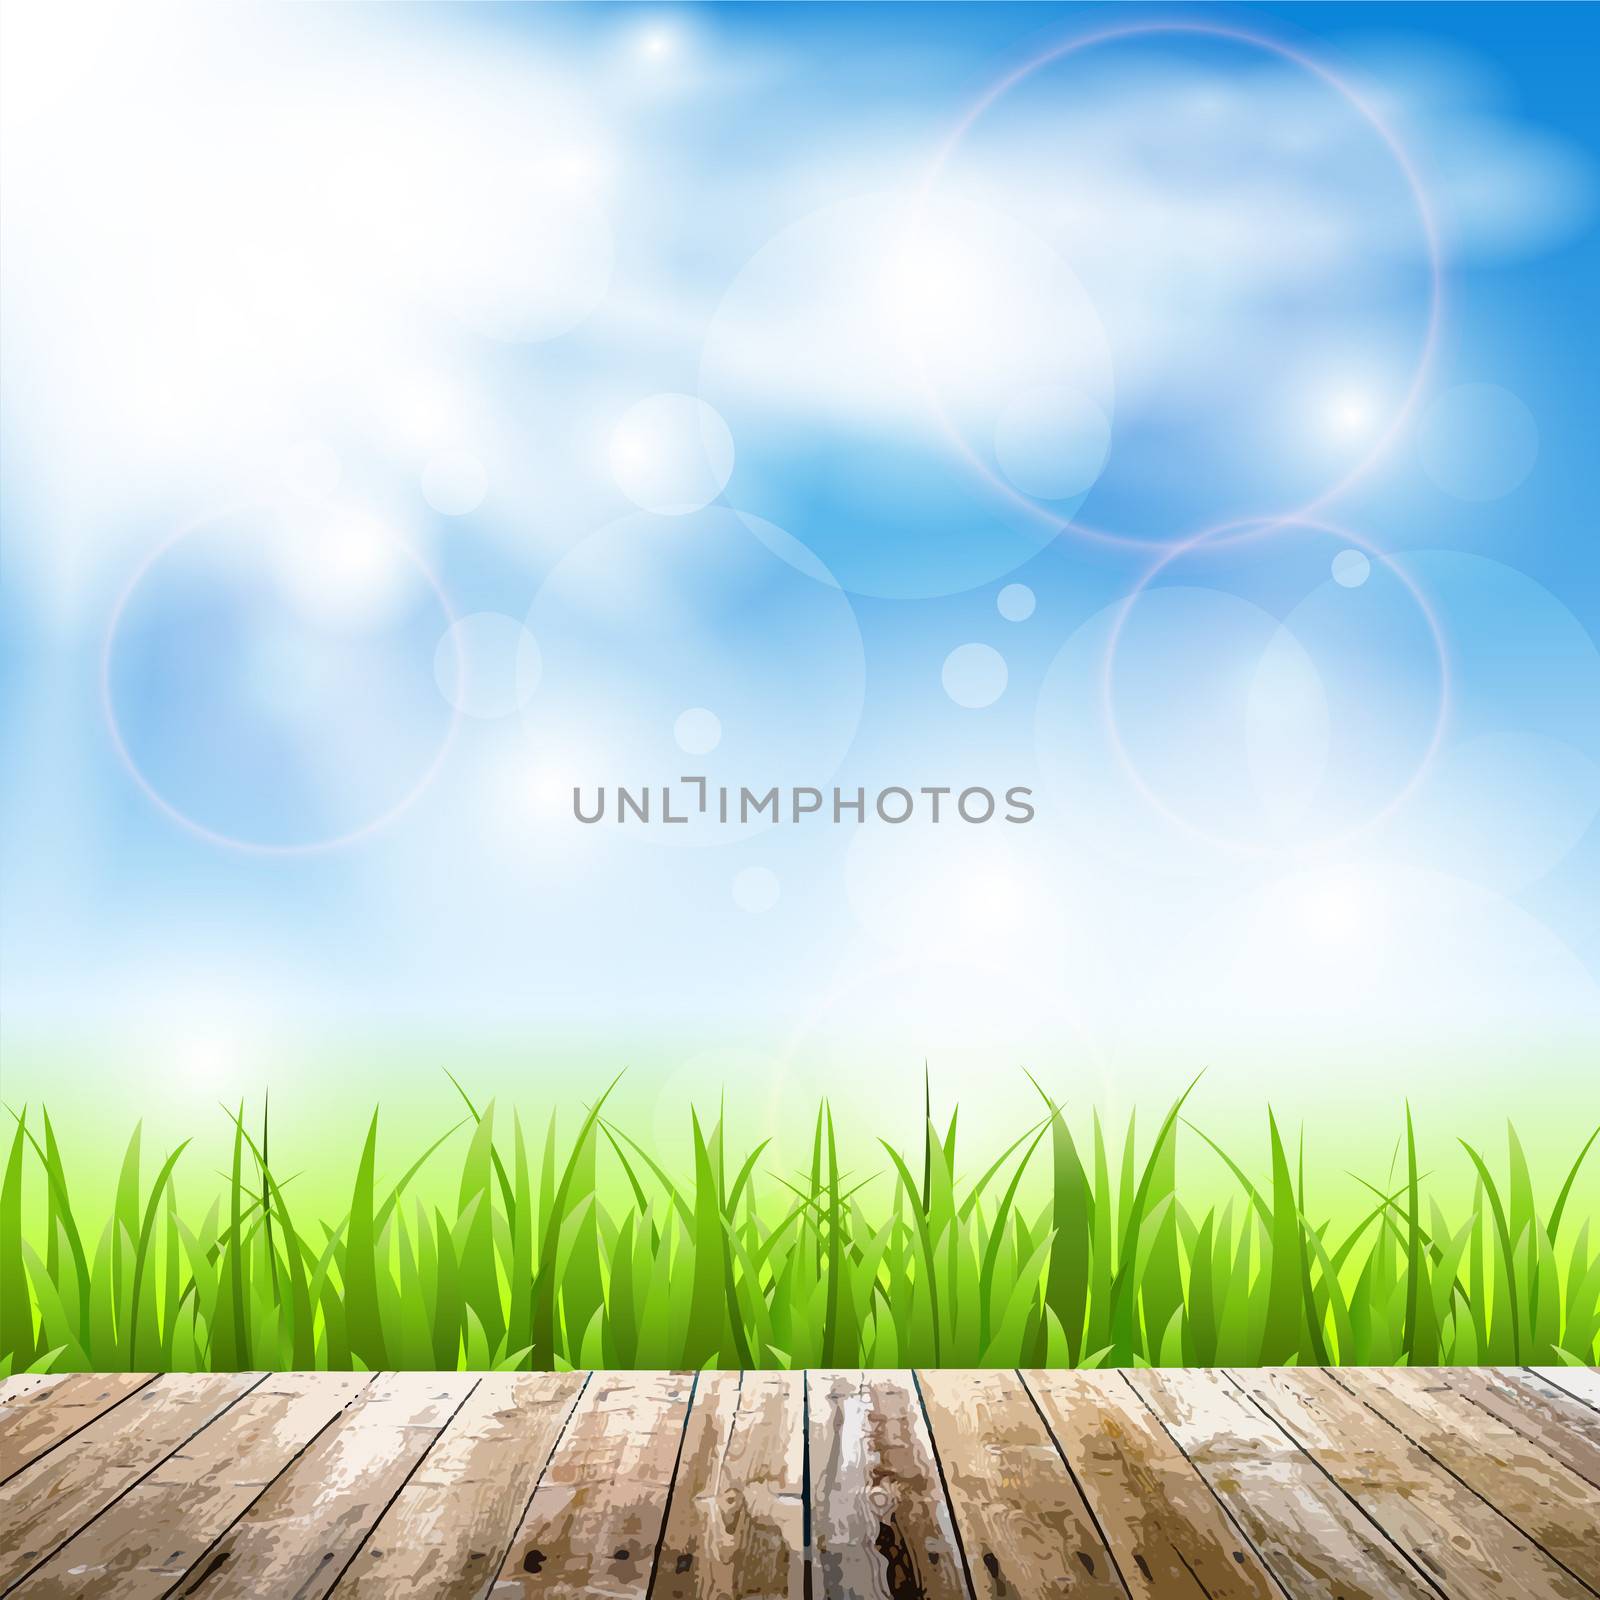 Background with wood, grass and sun in a blue sky